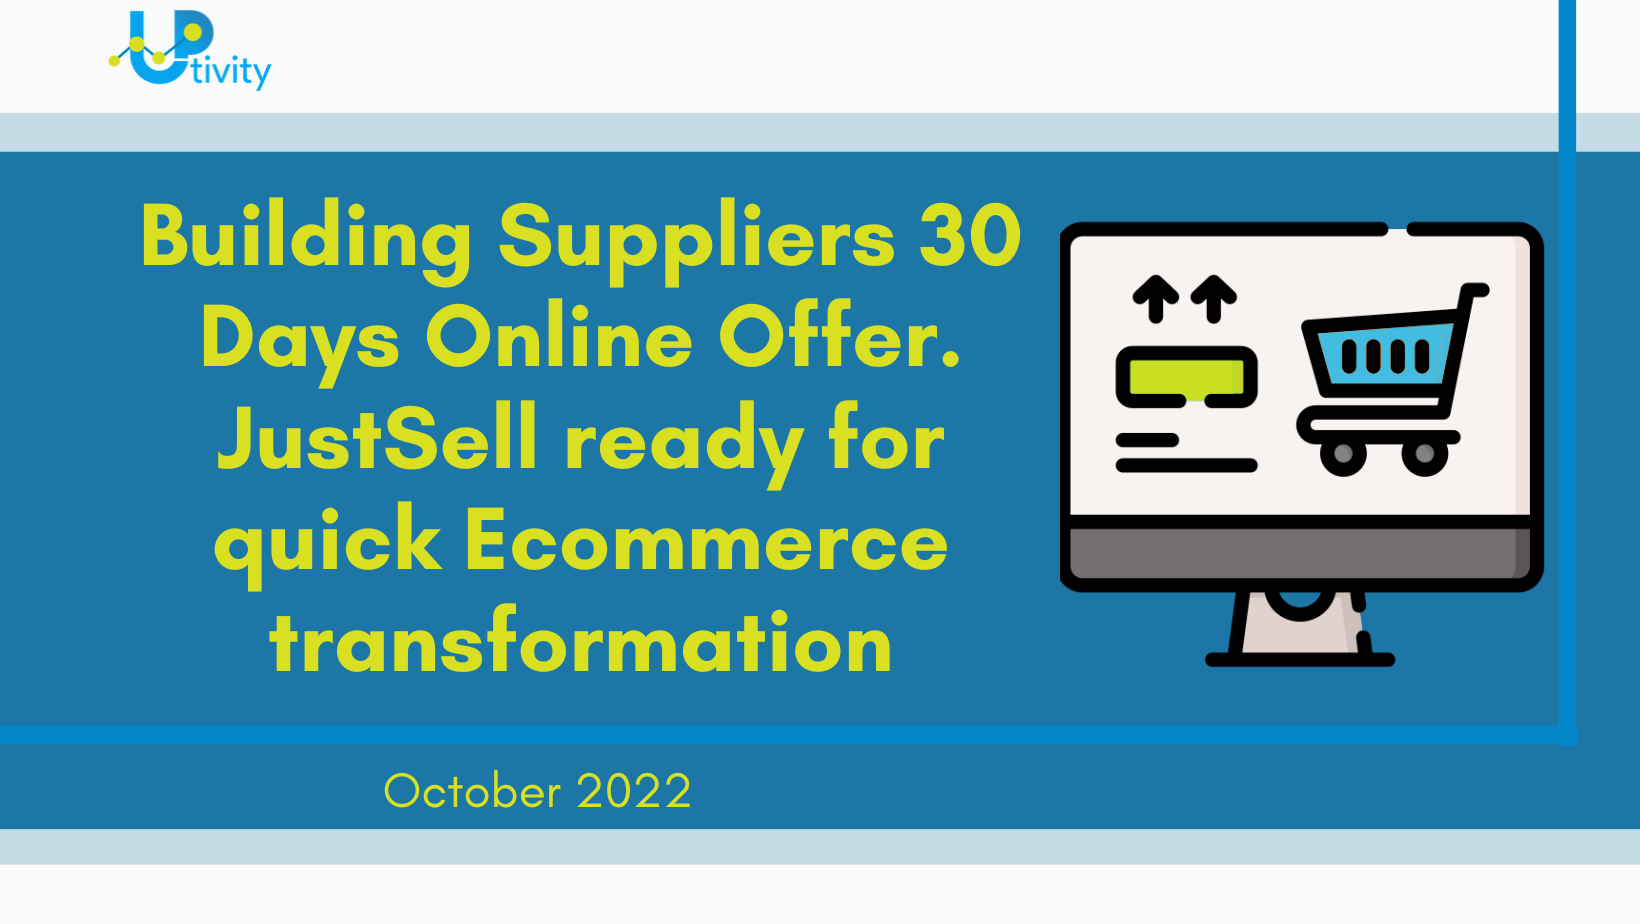 start your e-commerce building supplies business in 30 days with justsell